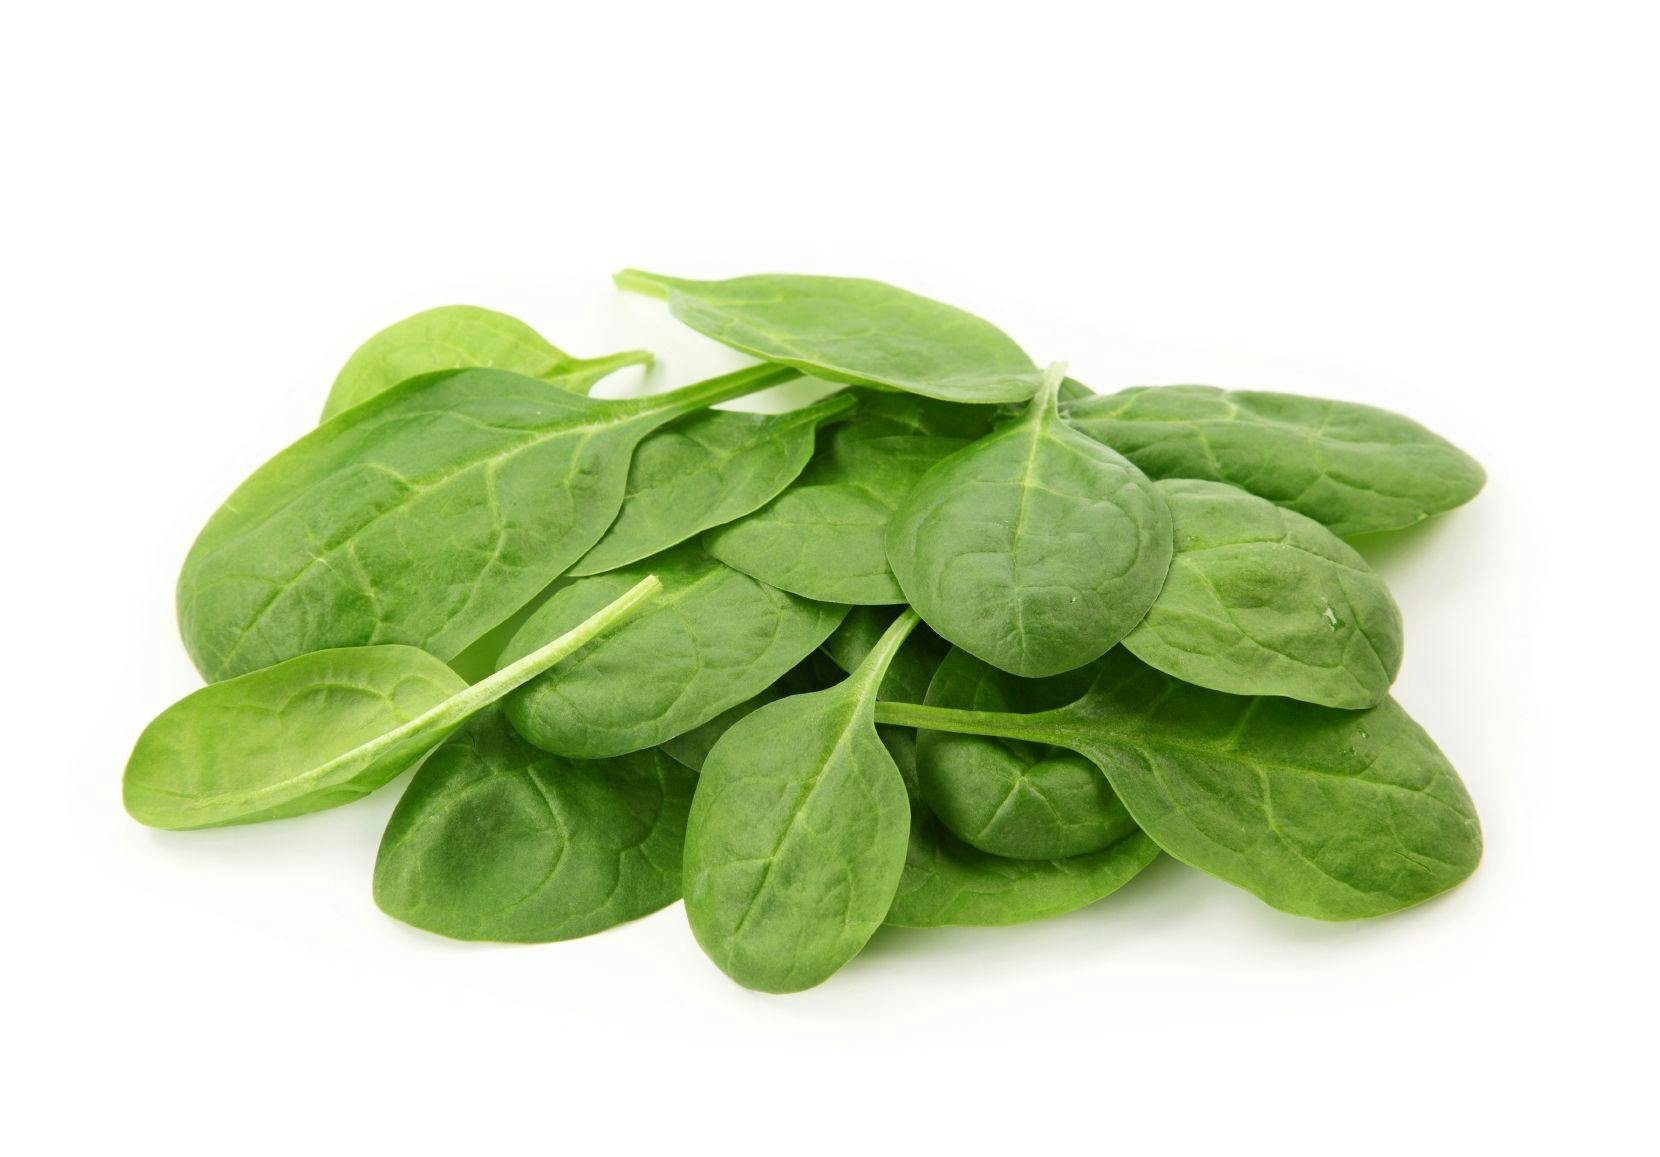 Stop Craving Sweets? Spinach Could Help